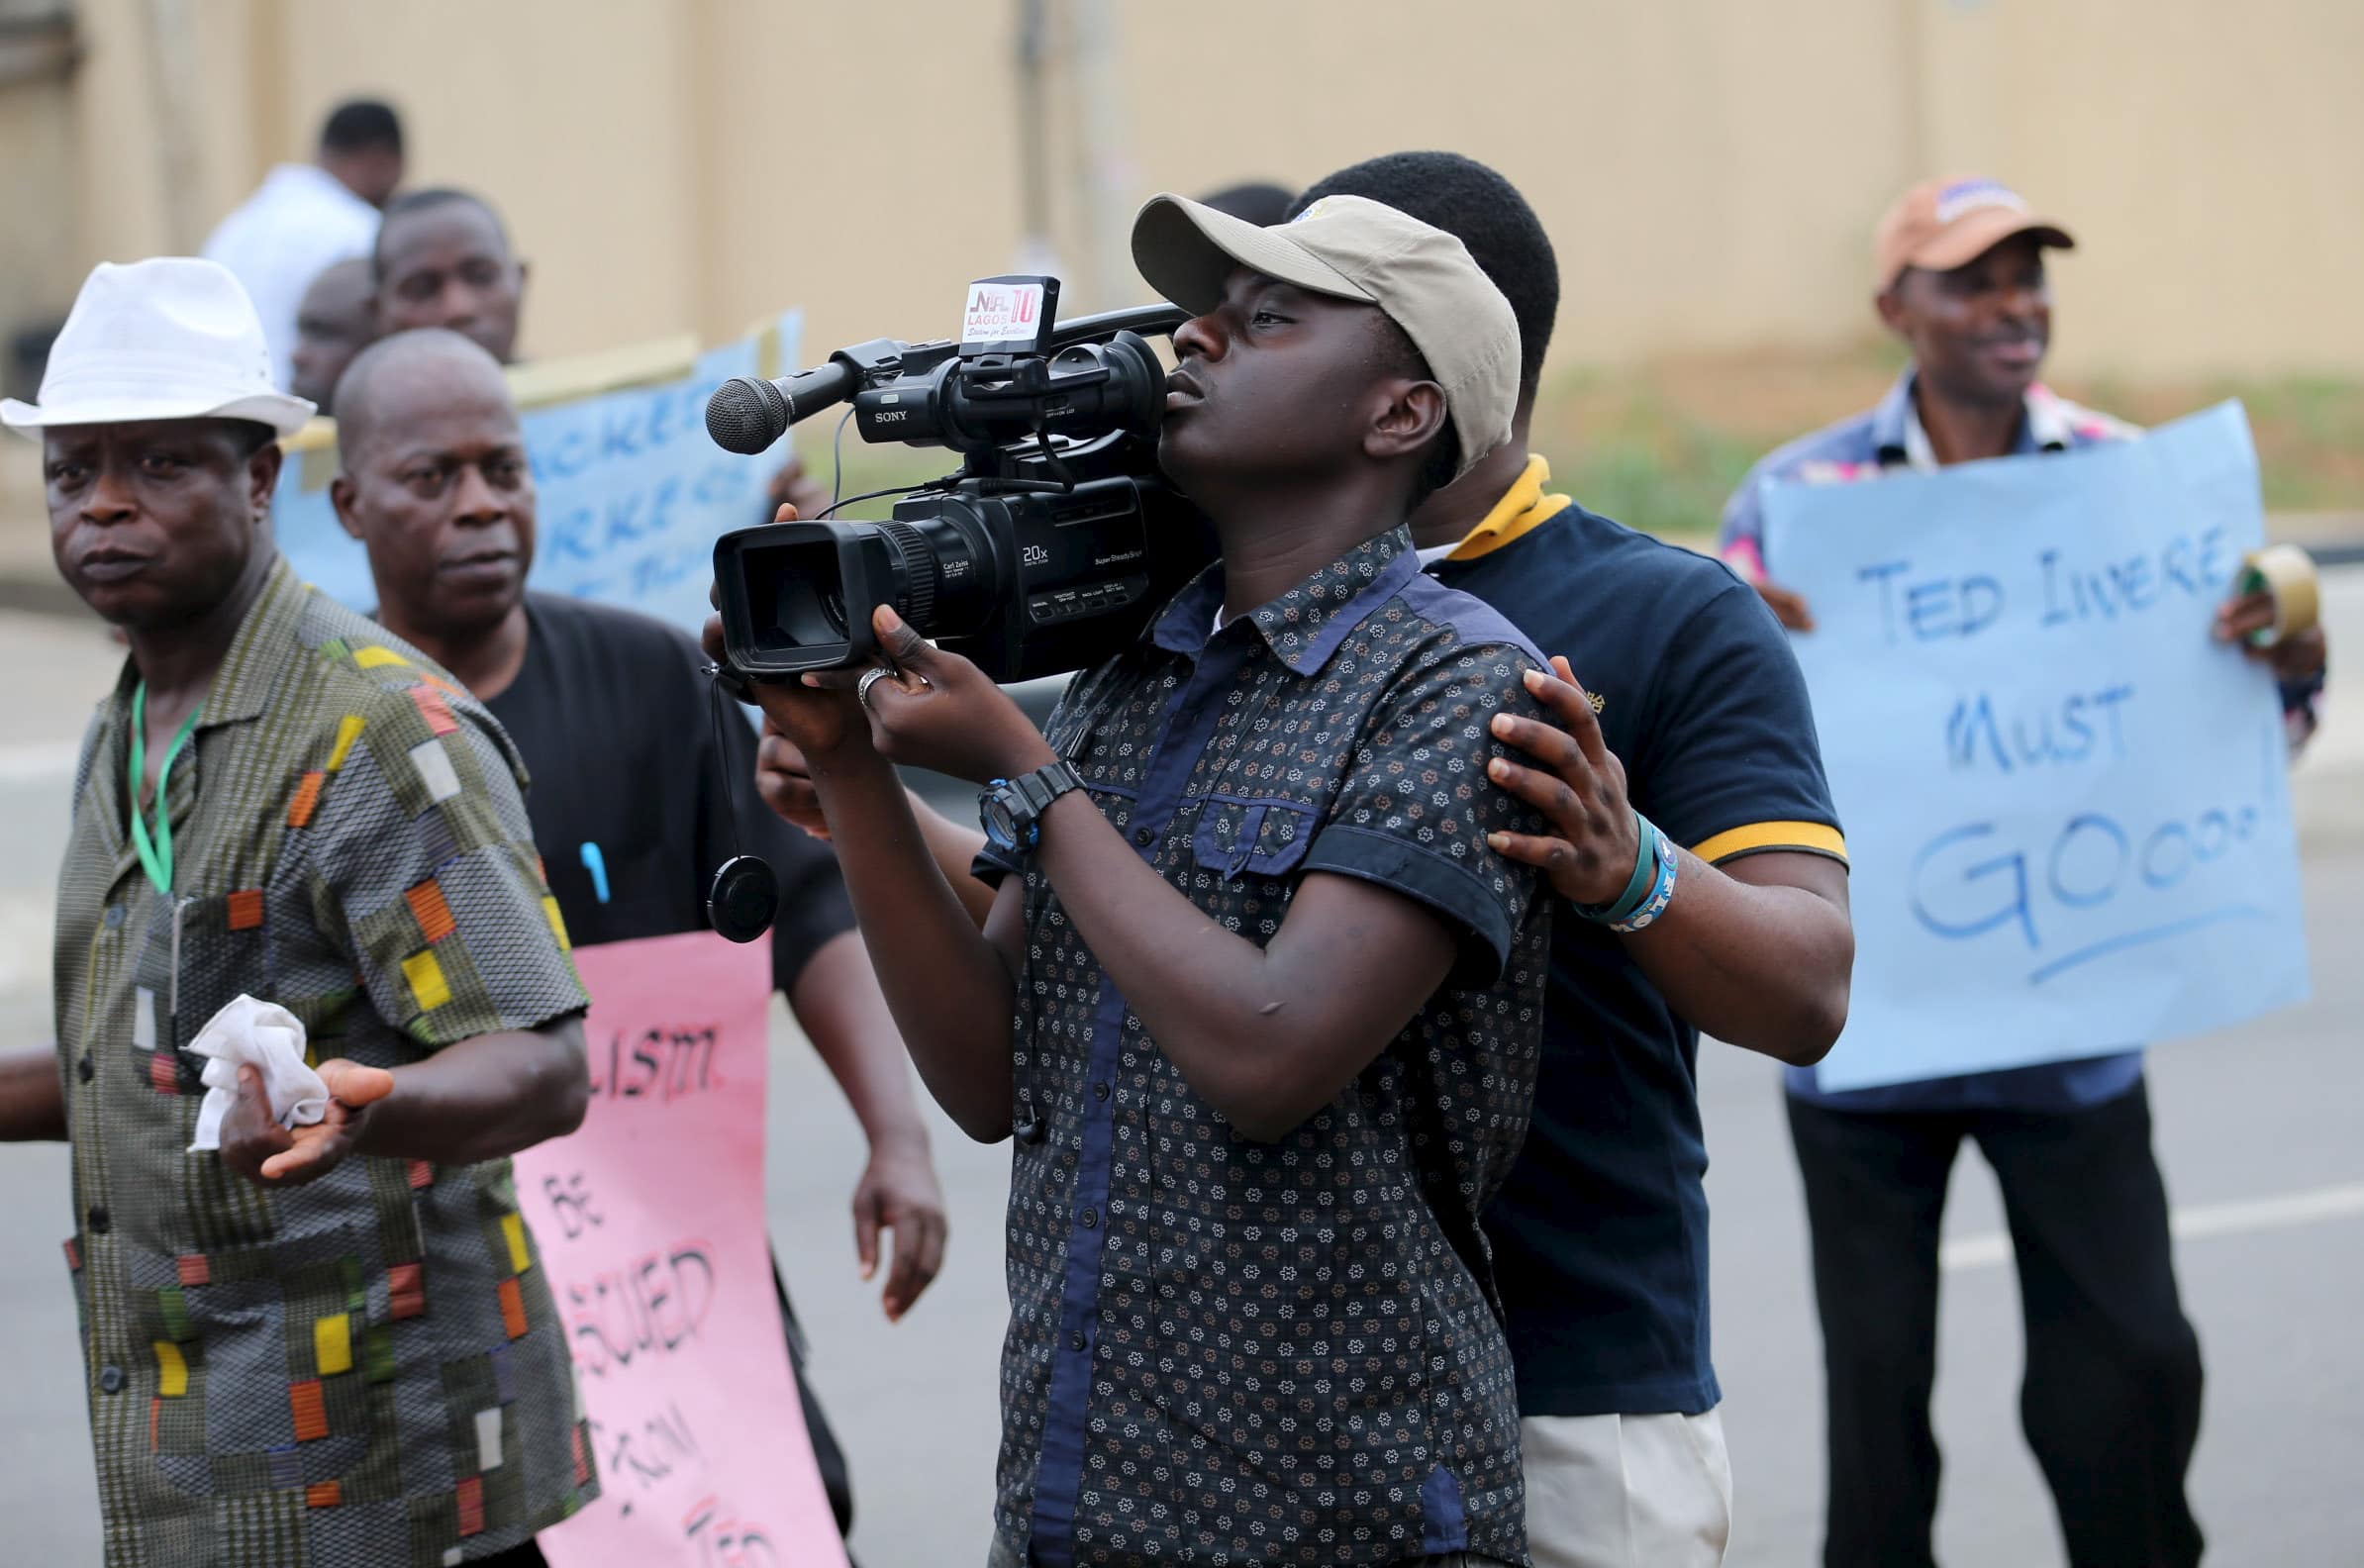 A cameraman films a protest in Lagos, Nigeria, 28 October 2015, REUTERS/Akintunde Akinleye